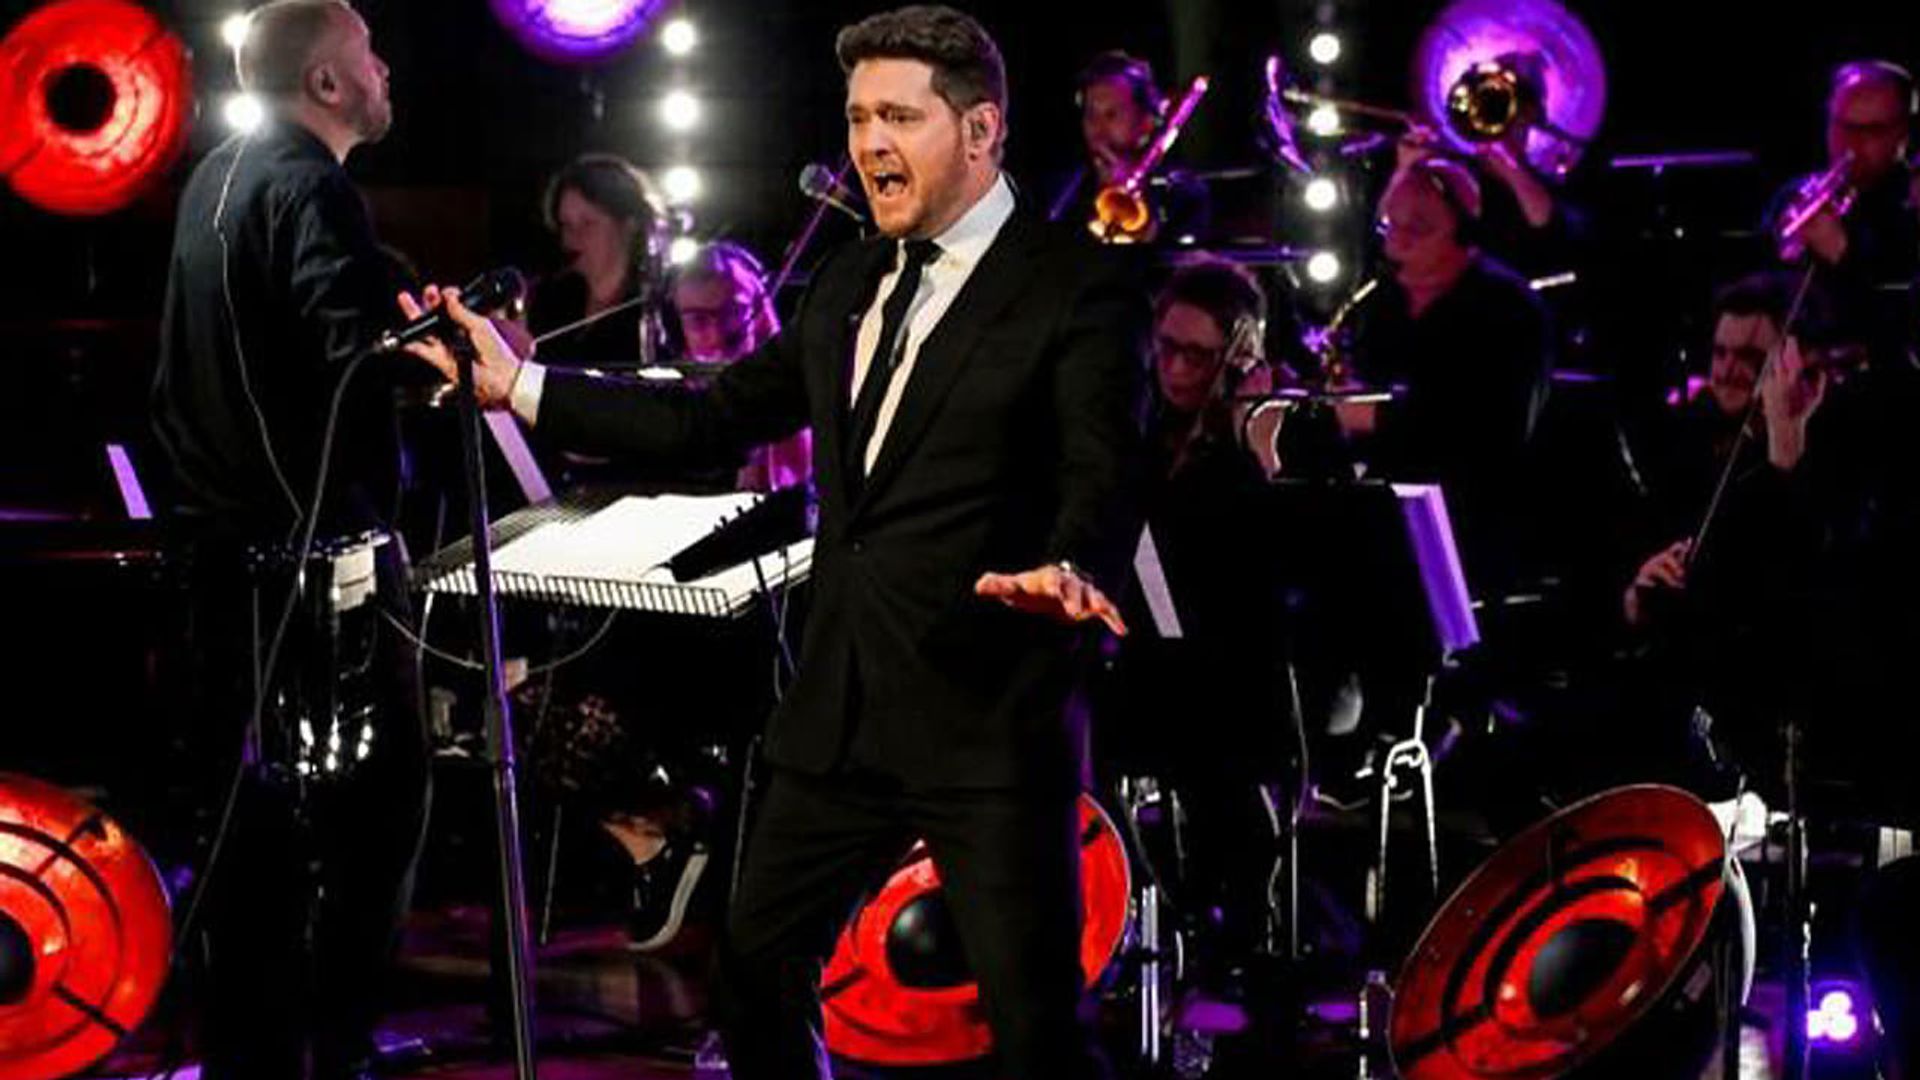 Michael Bublé's Christmas in Hollywood background